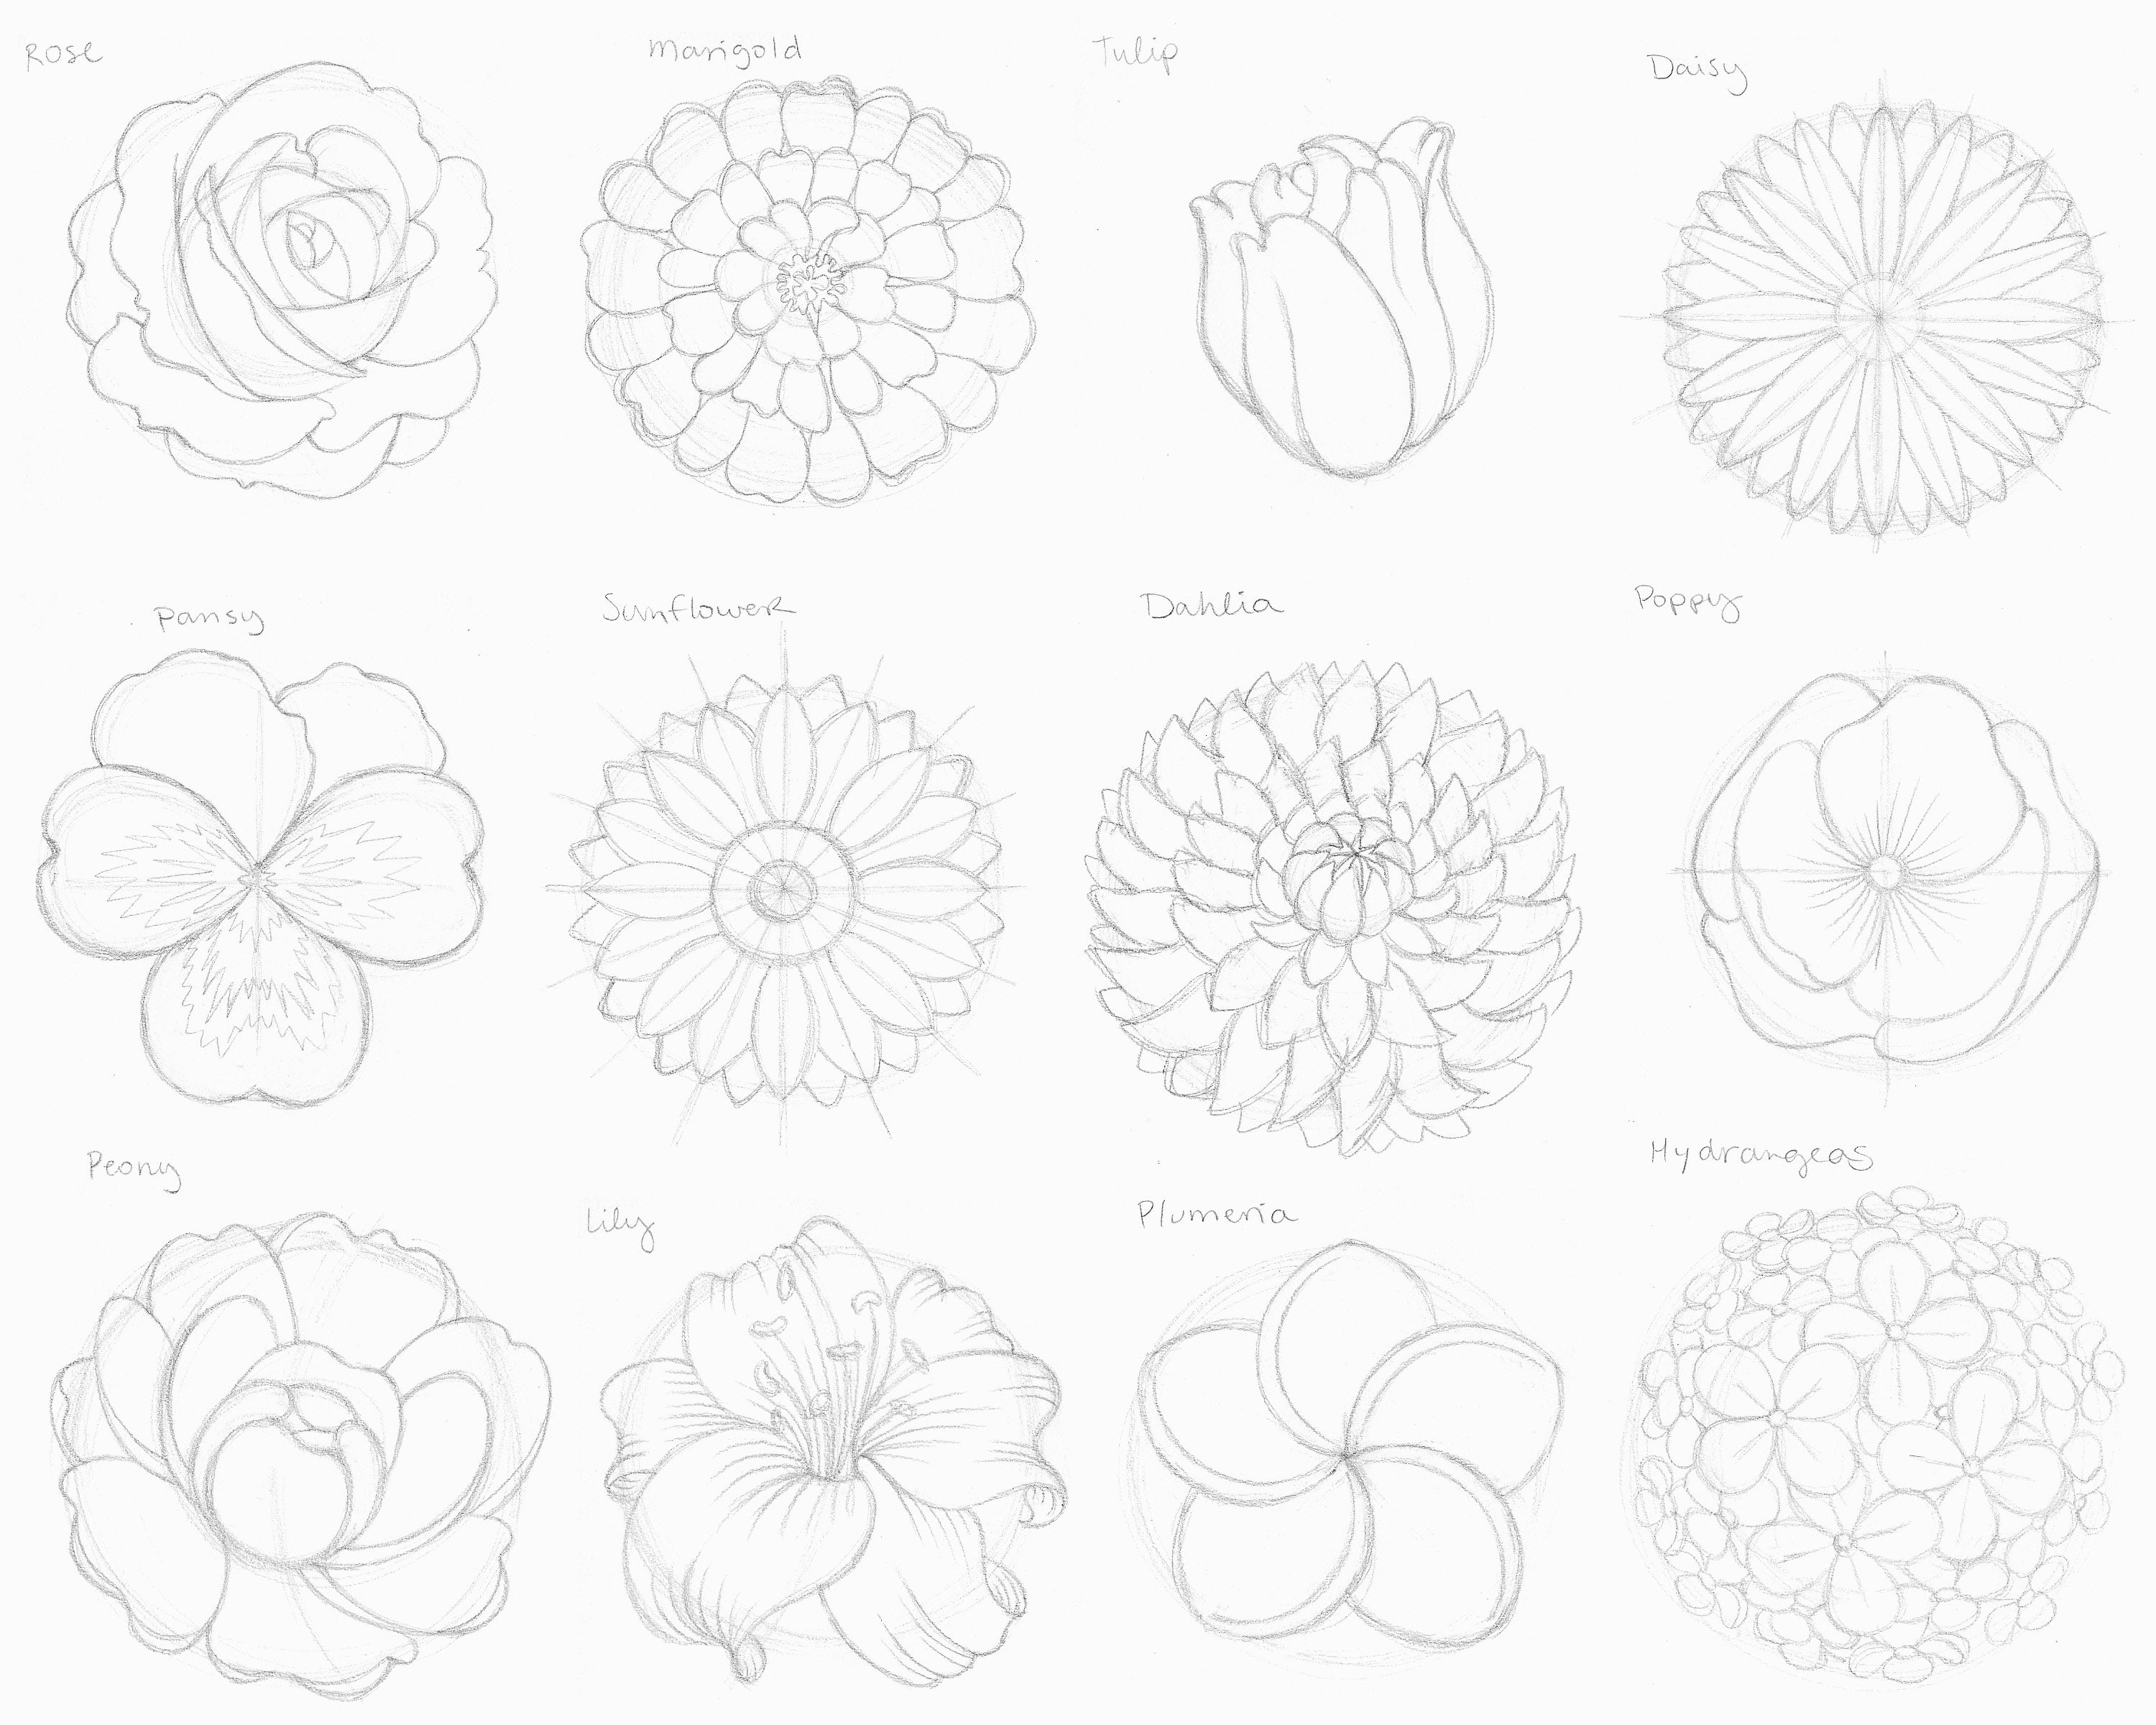 How to draw different types of flowers easily - YouTube